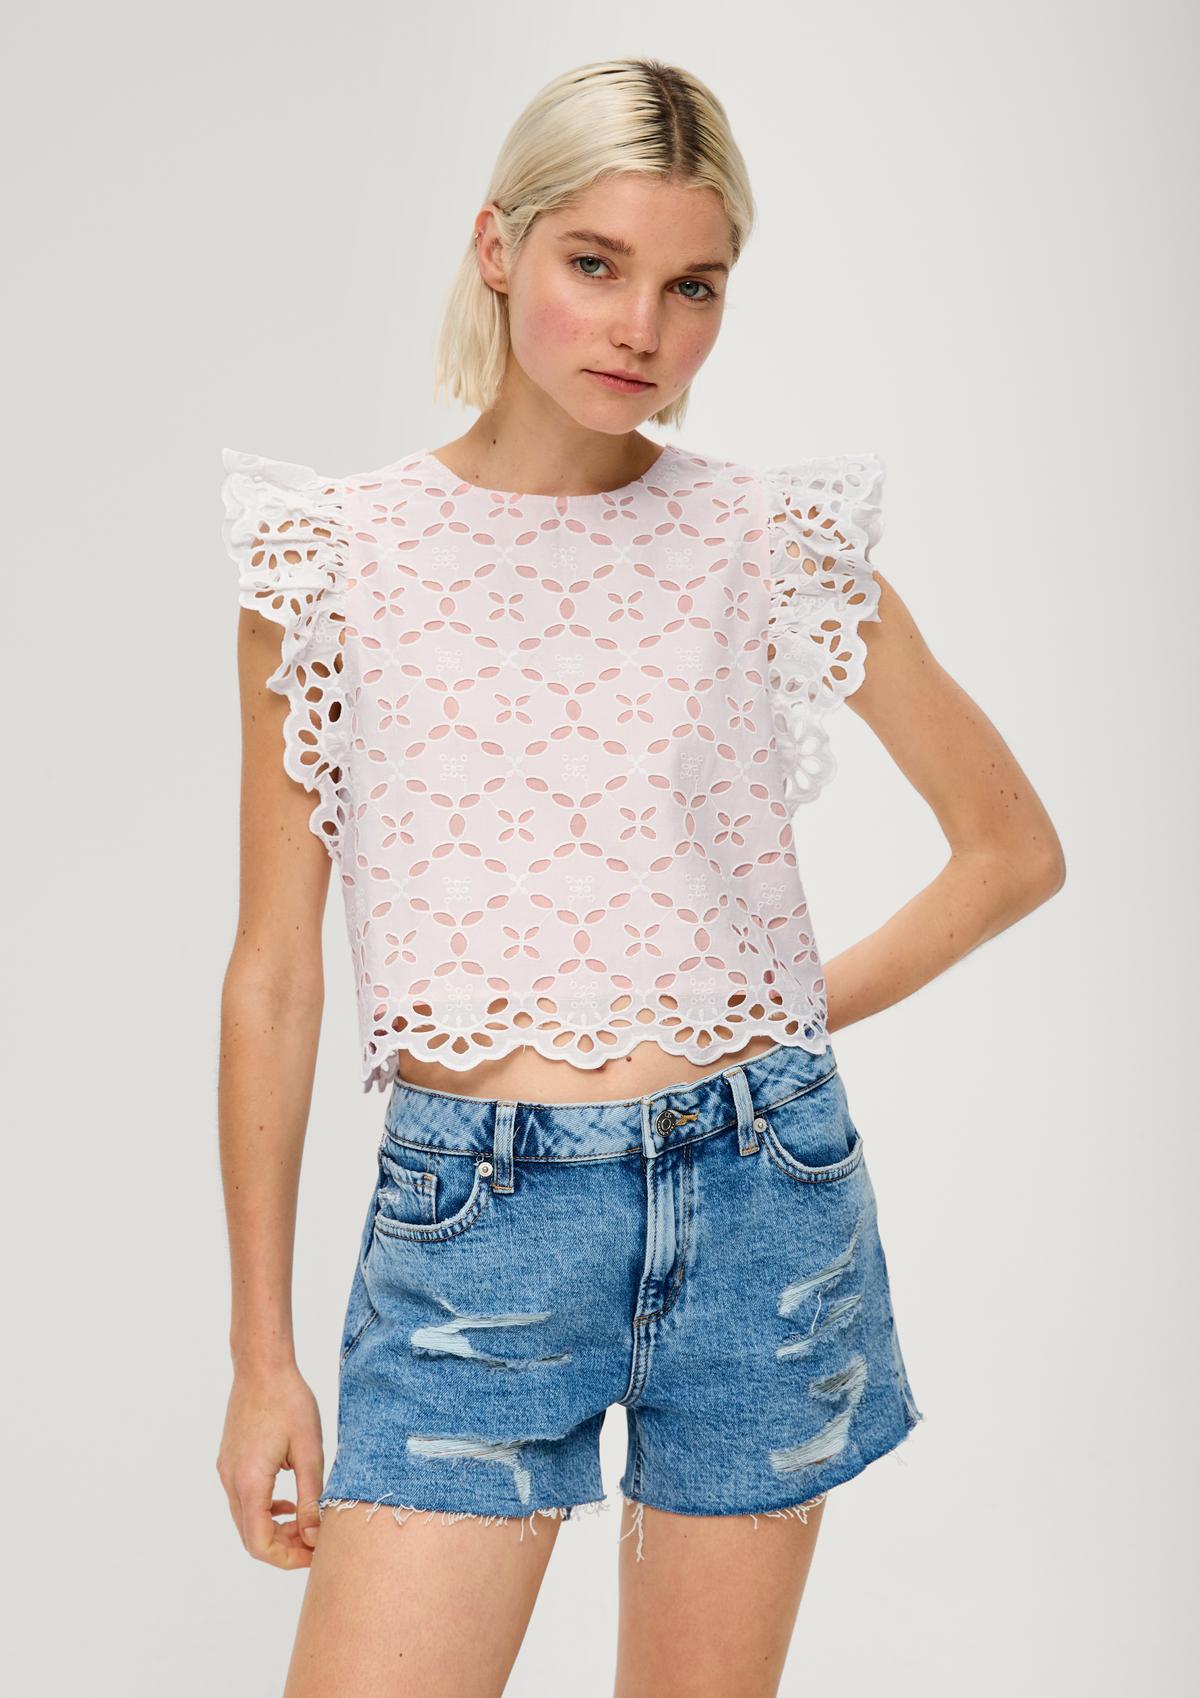 Sleeveless lace top